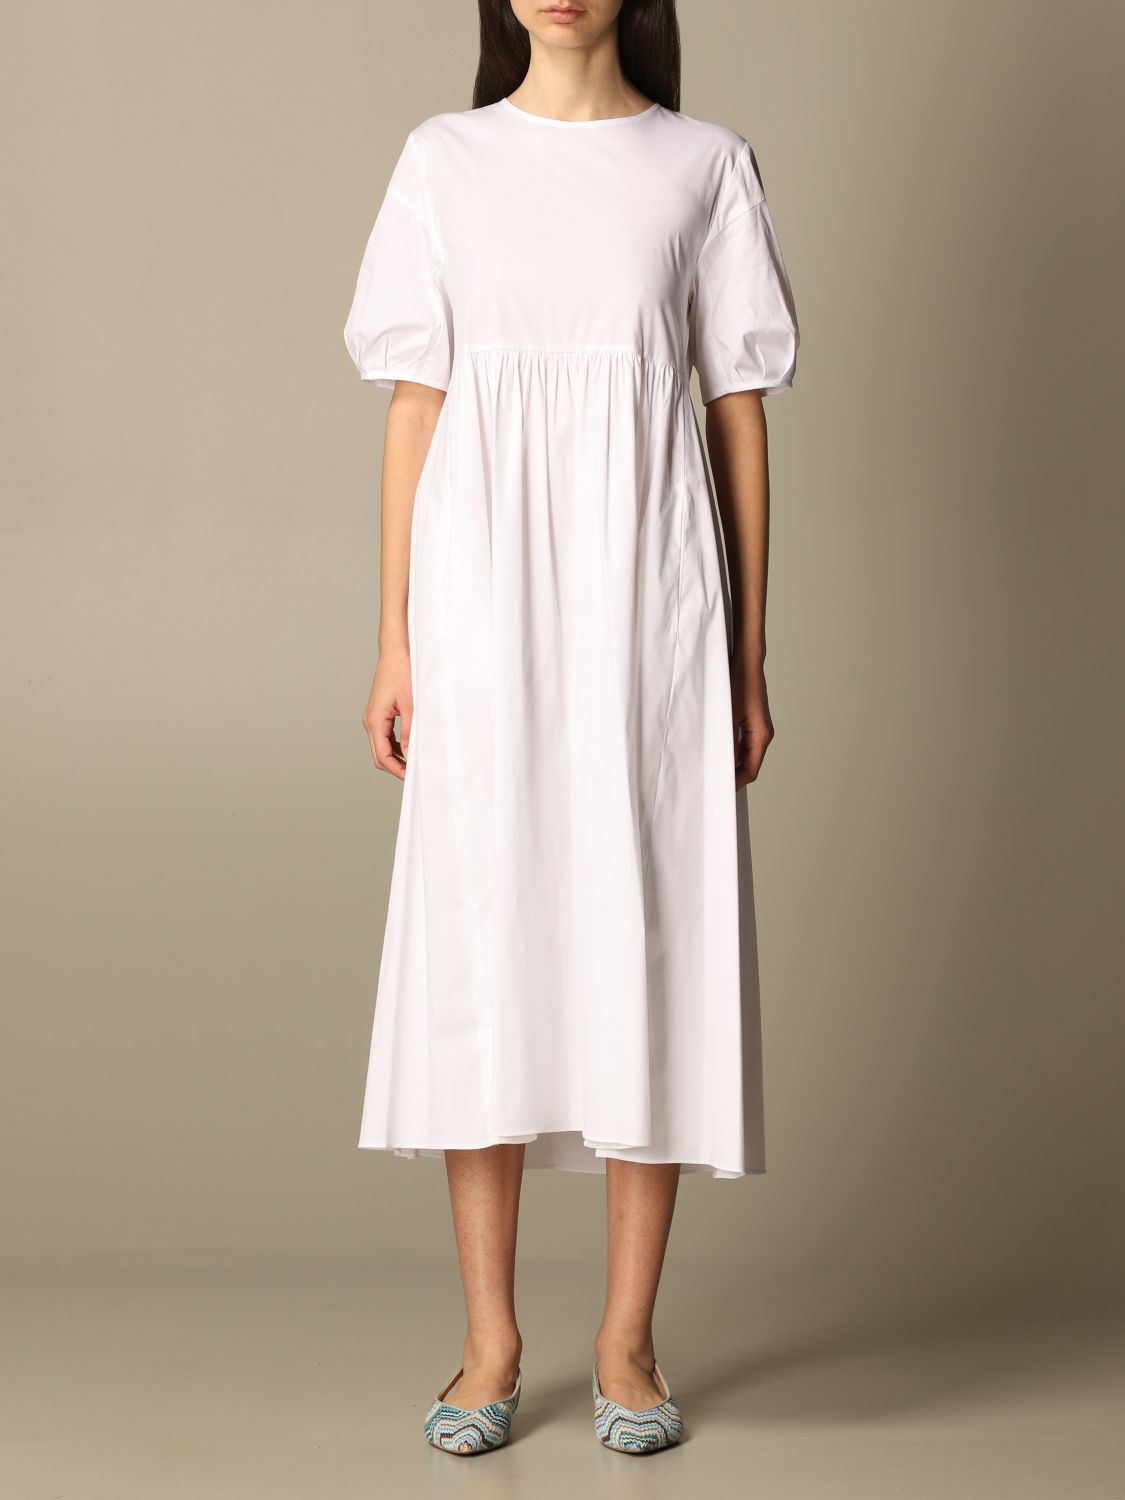 S Max Mara Outlet: dress in cotton blend - White | S Max Mara dresses 92212012600 online on